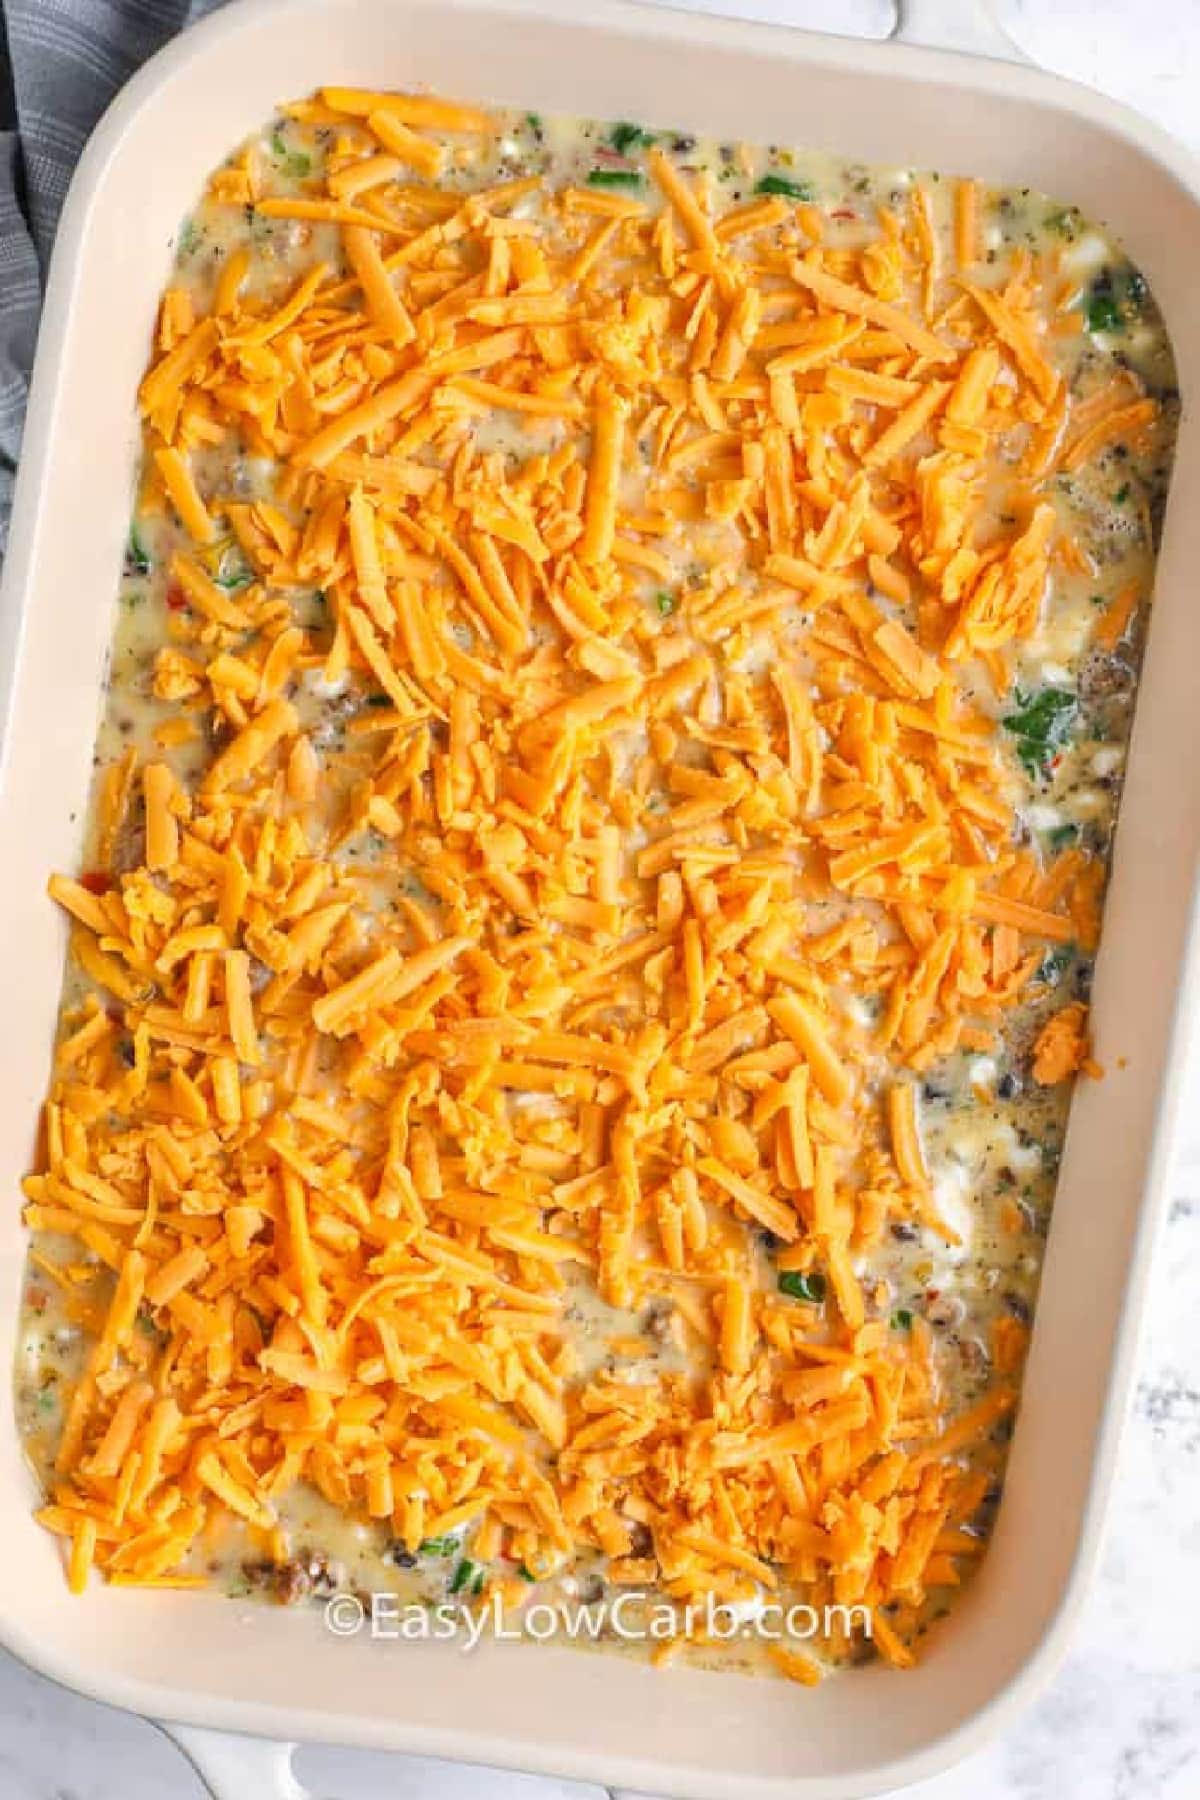 Sausage Egg Casserole, with cheddar sprinkled on top, in a baking dish before baked